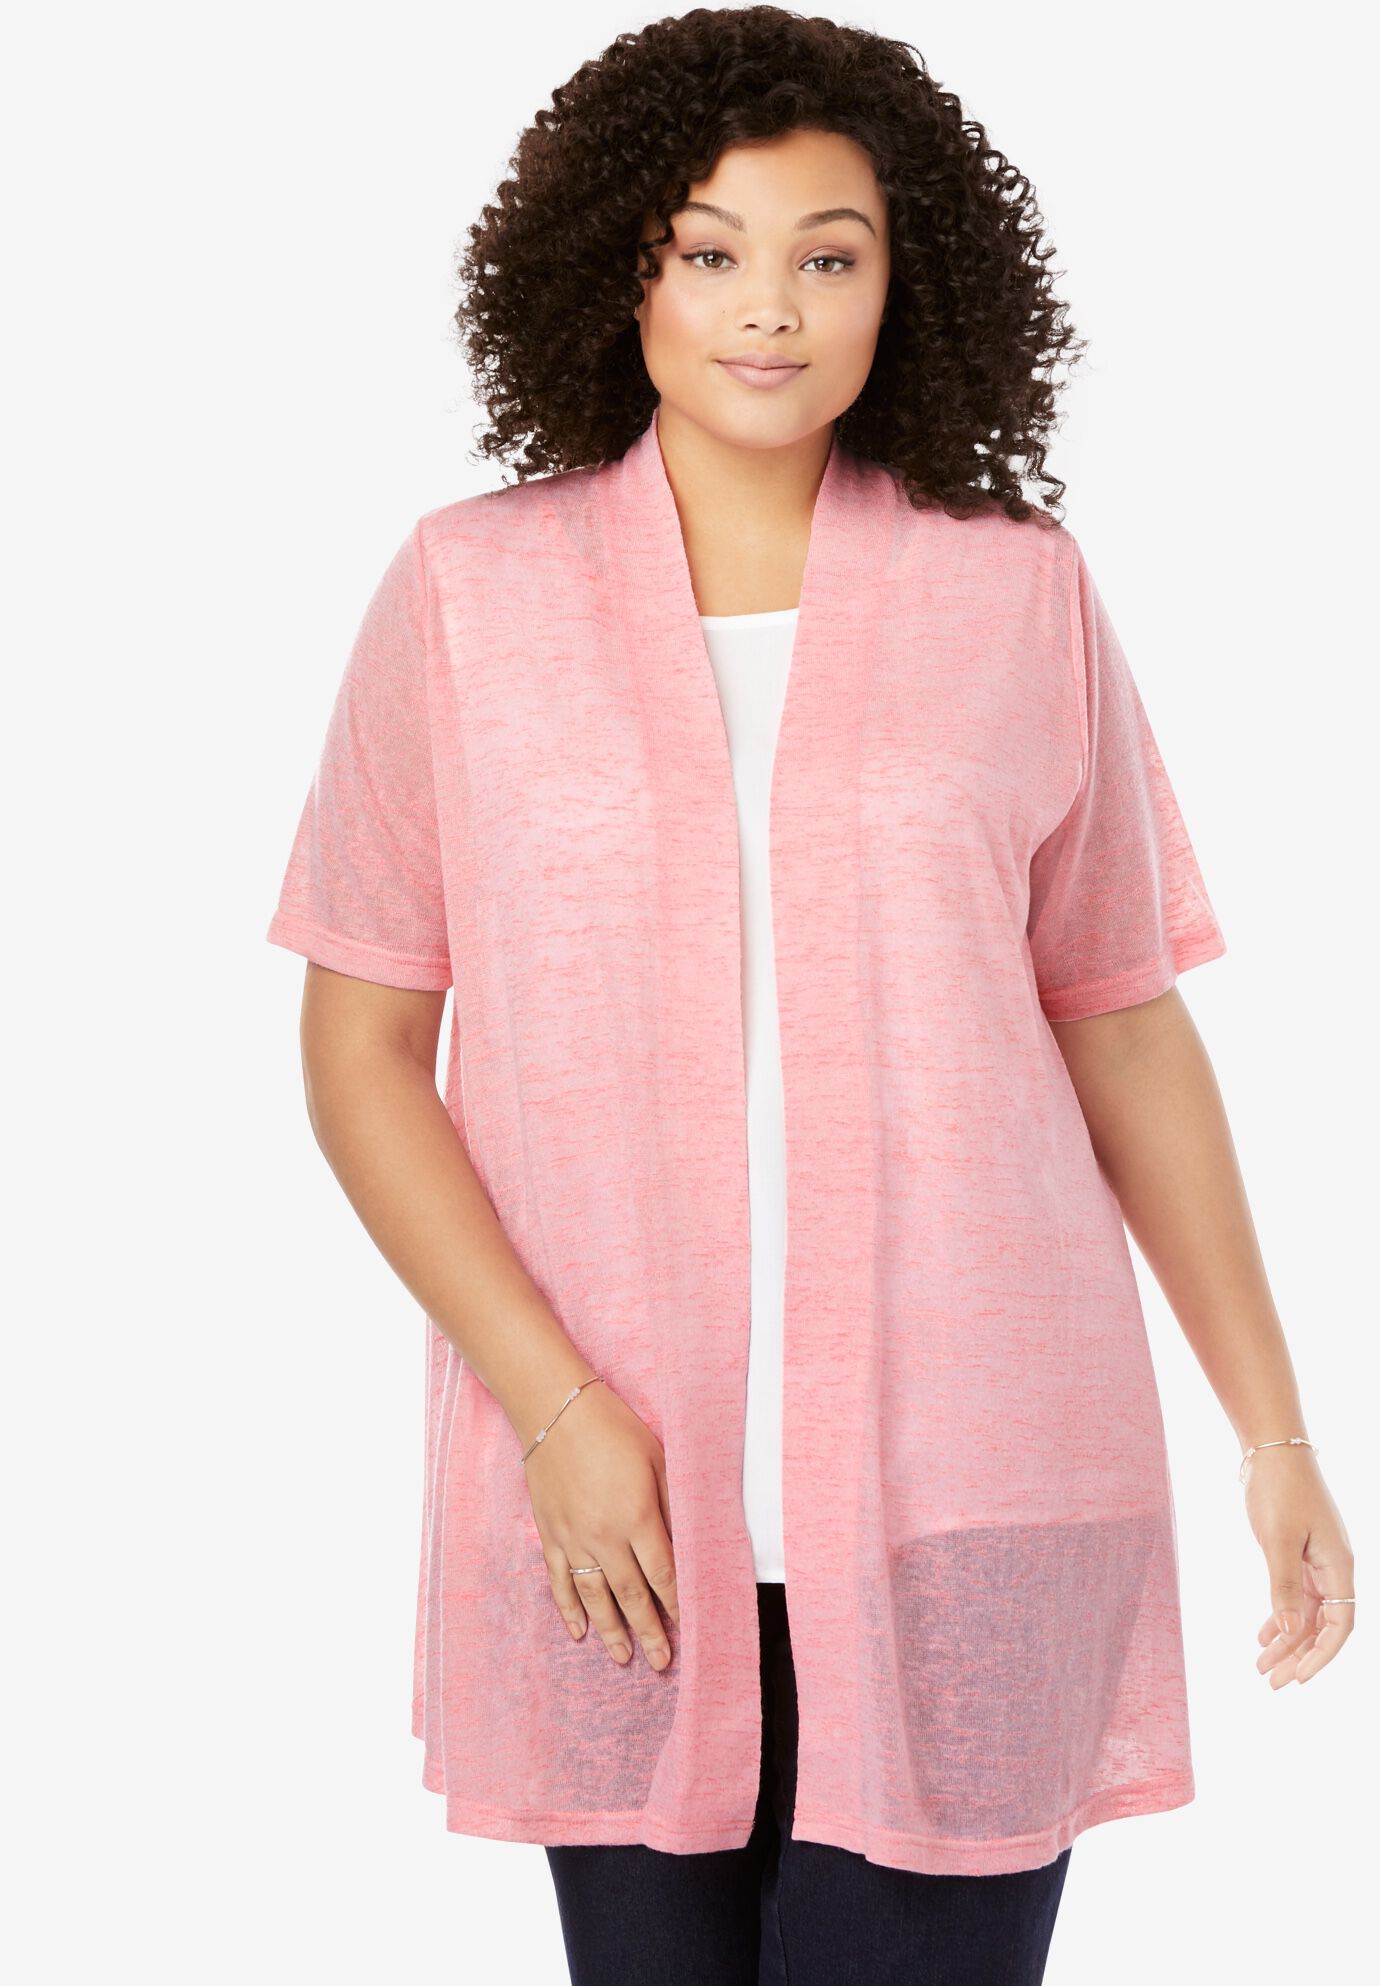 Woman Within Womens Plus Size Open Front Cable Knit Cardigan